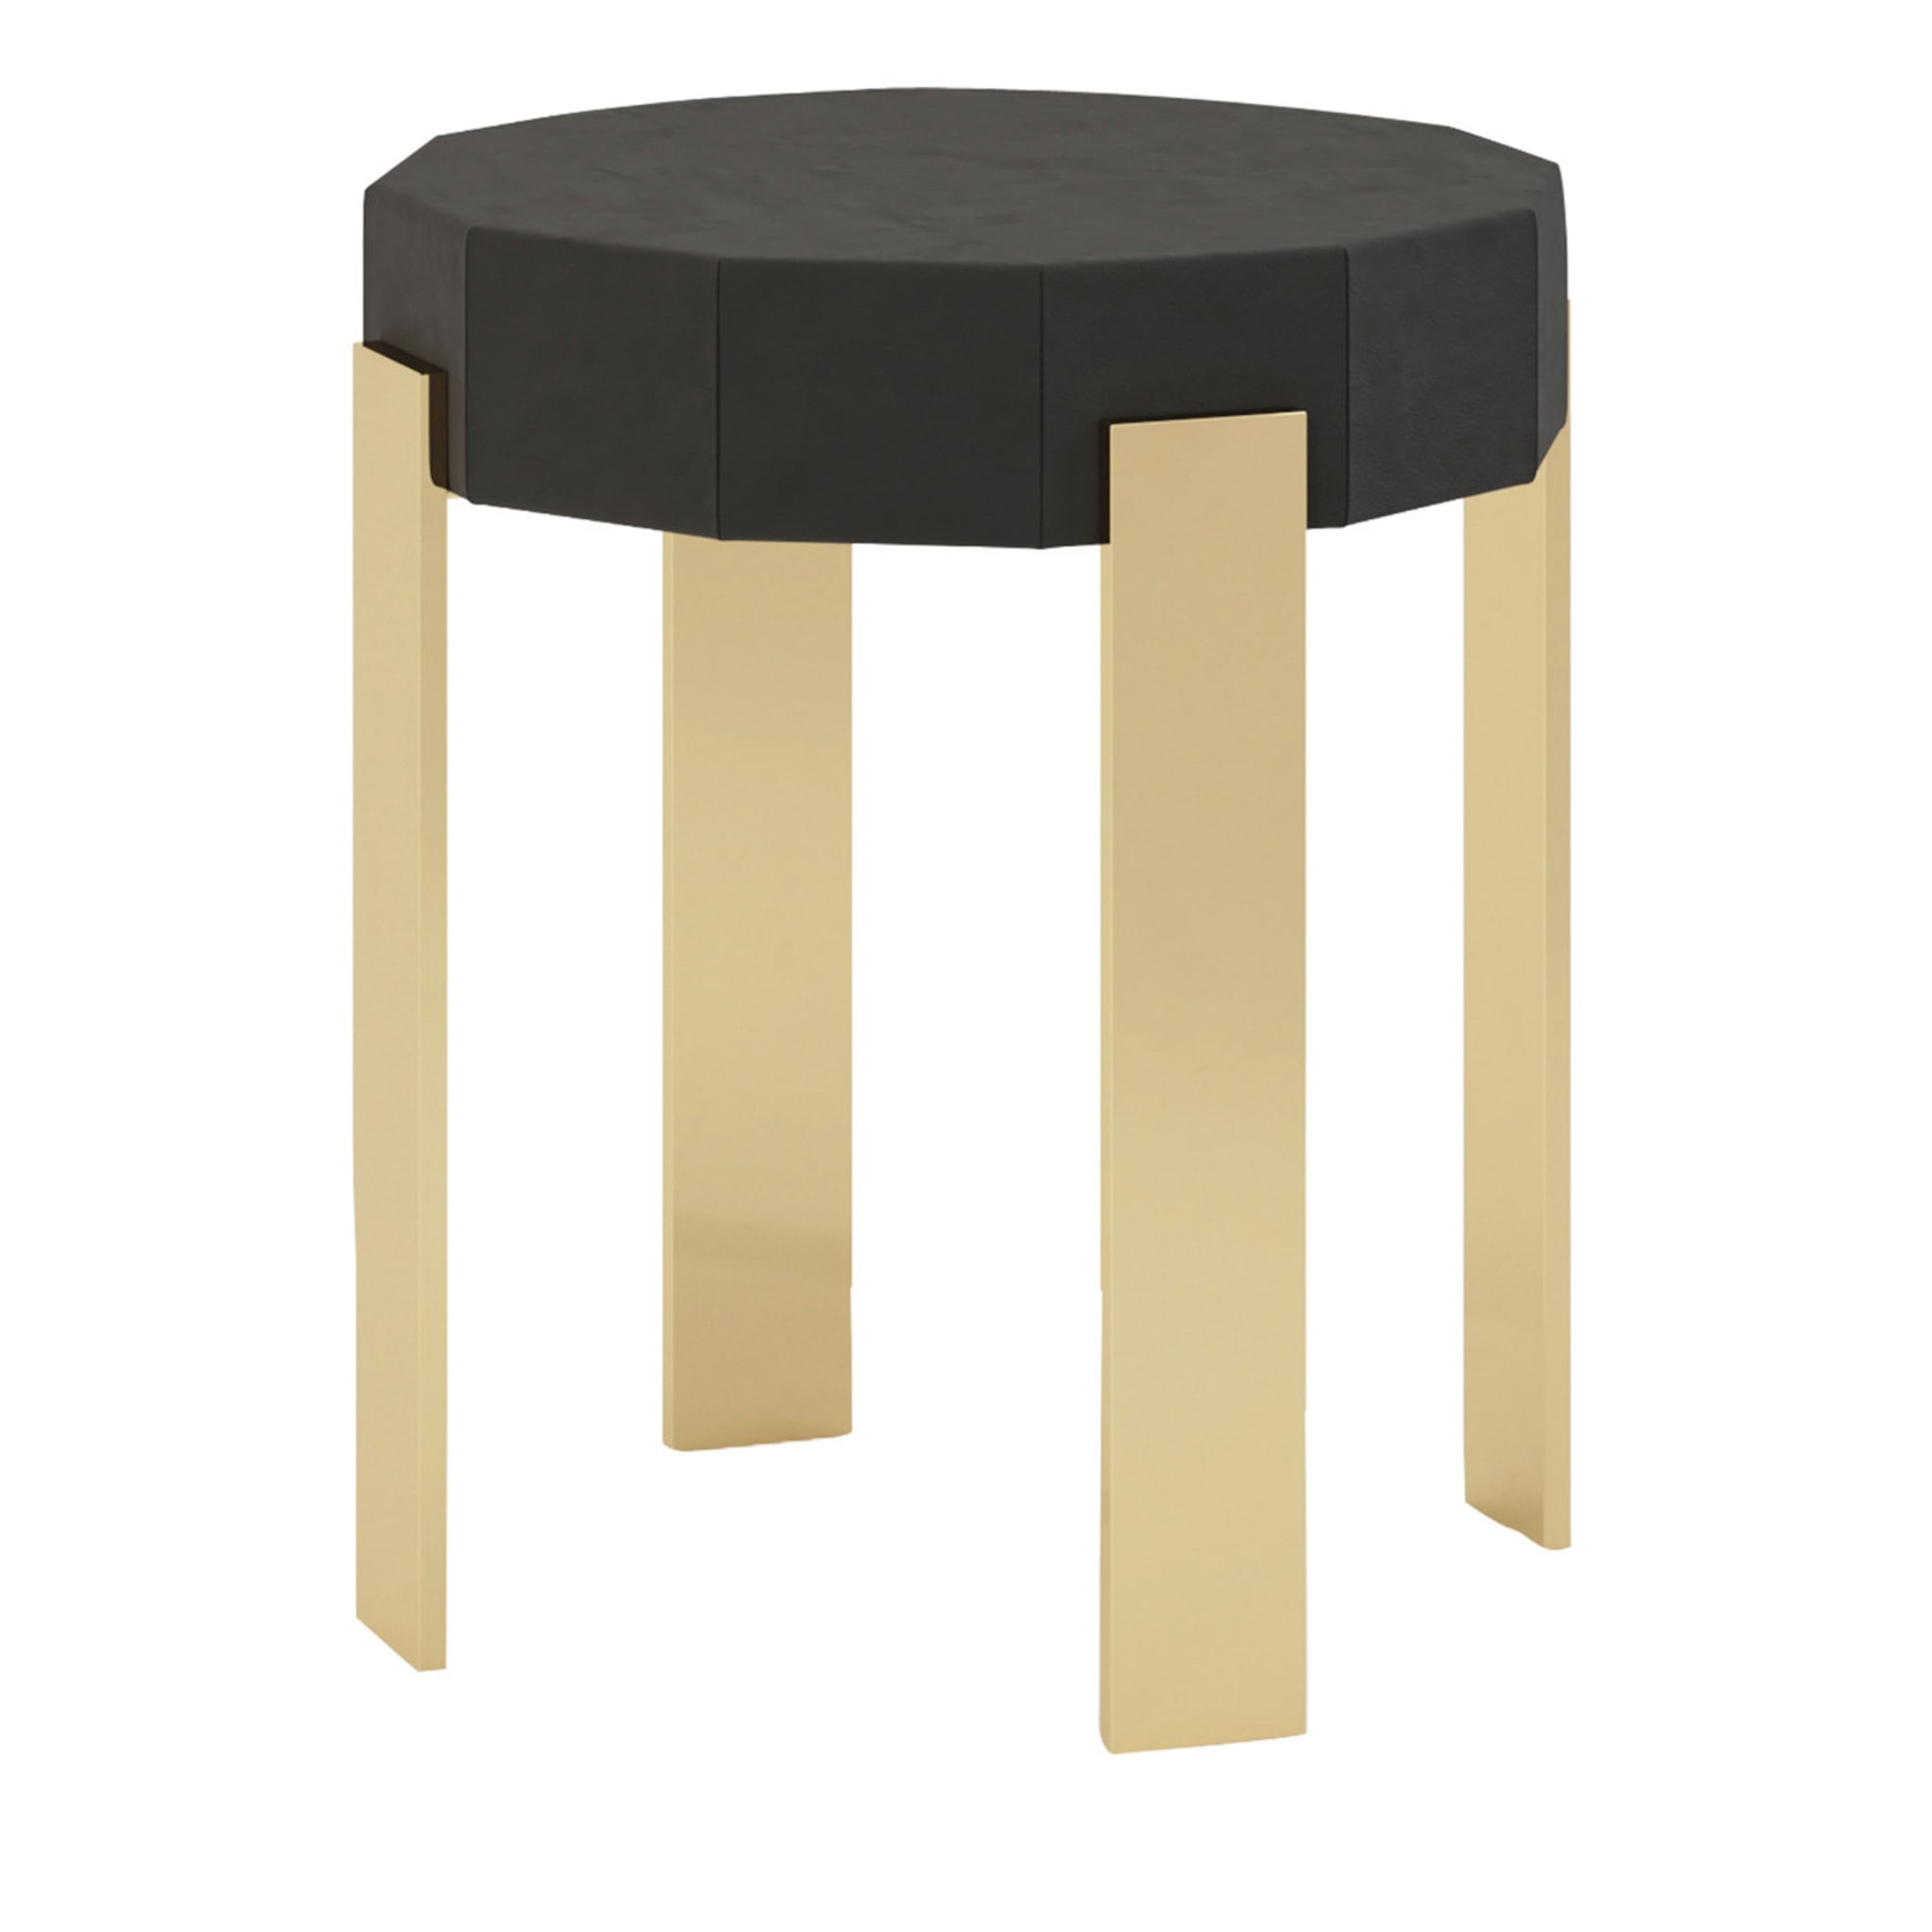 Carthay Side Table by Giannella Ventura - Main view